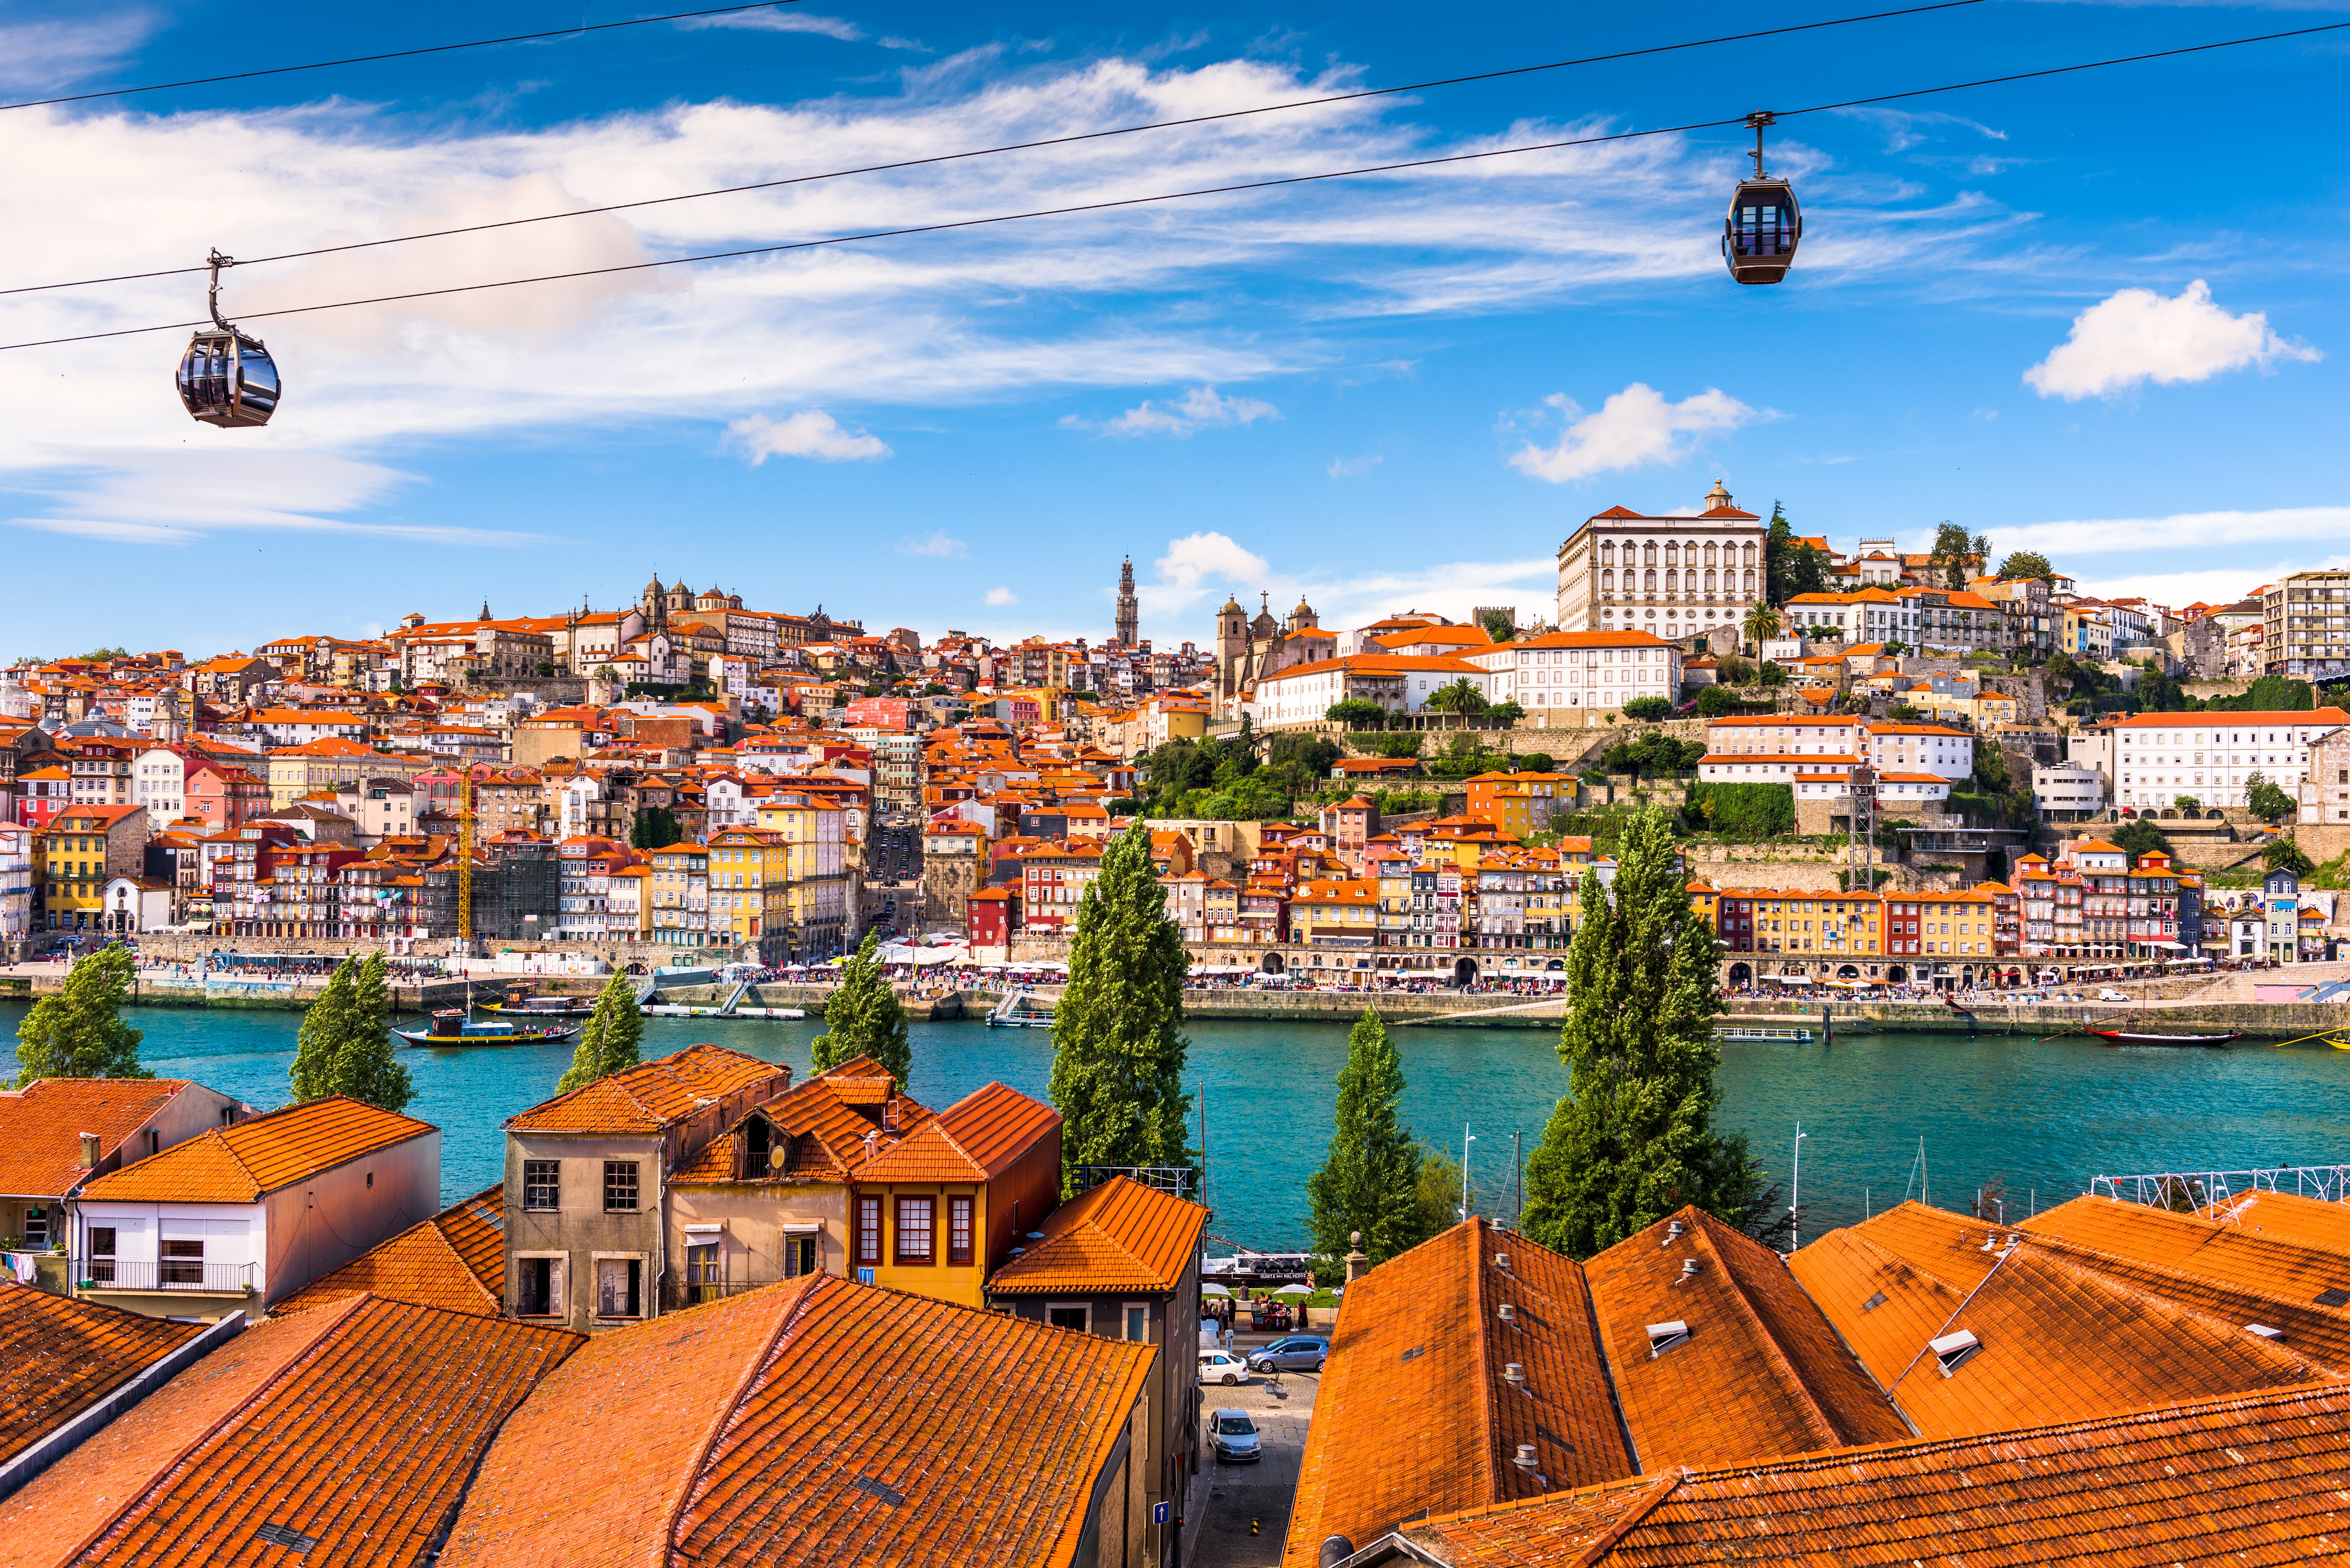 Through new eyes: Porto’s old quarter on the Douro river in Portugal